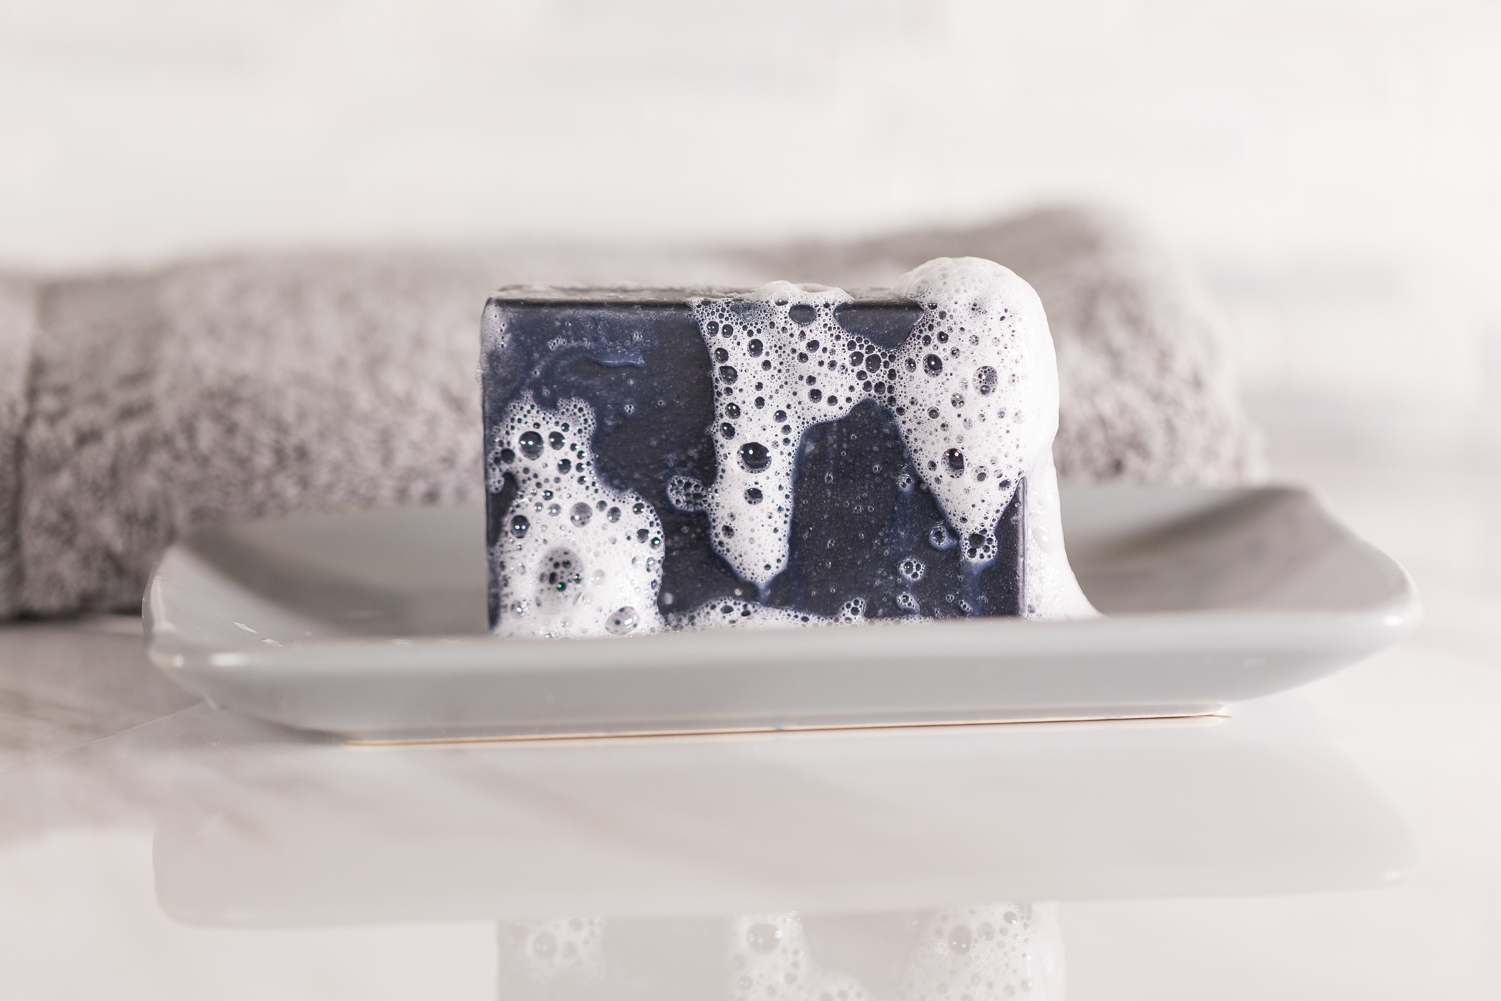 We Launch Bonvera At Home Line with Two Homemade Bar Soaps